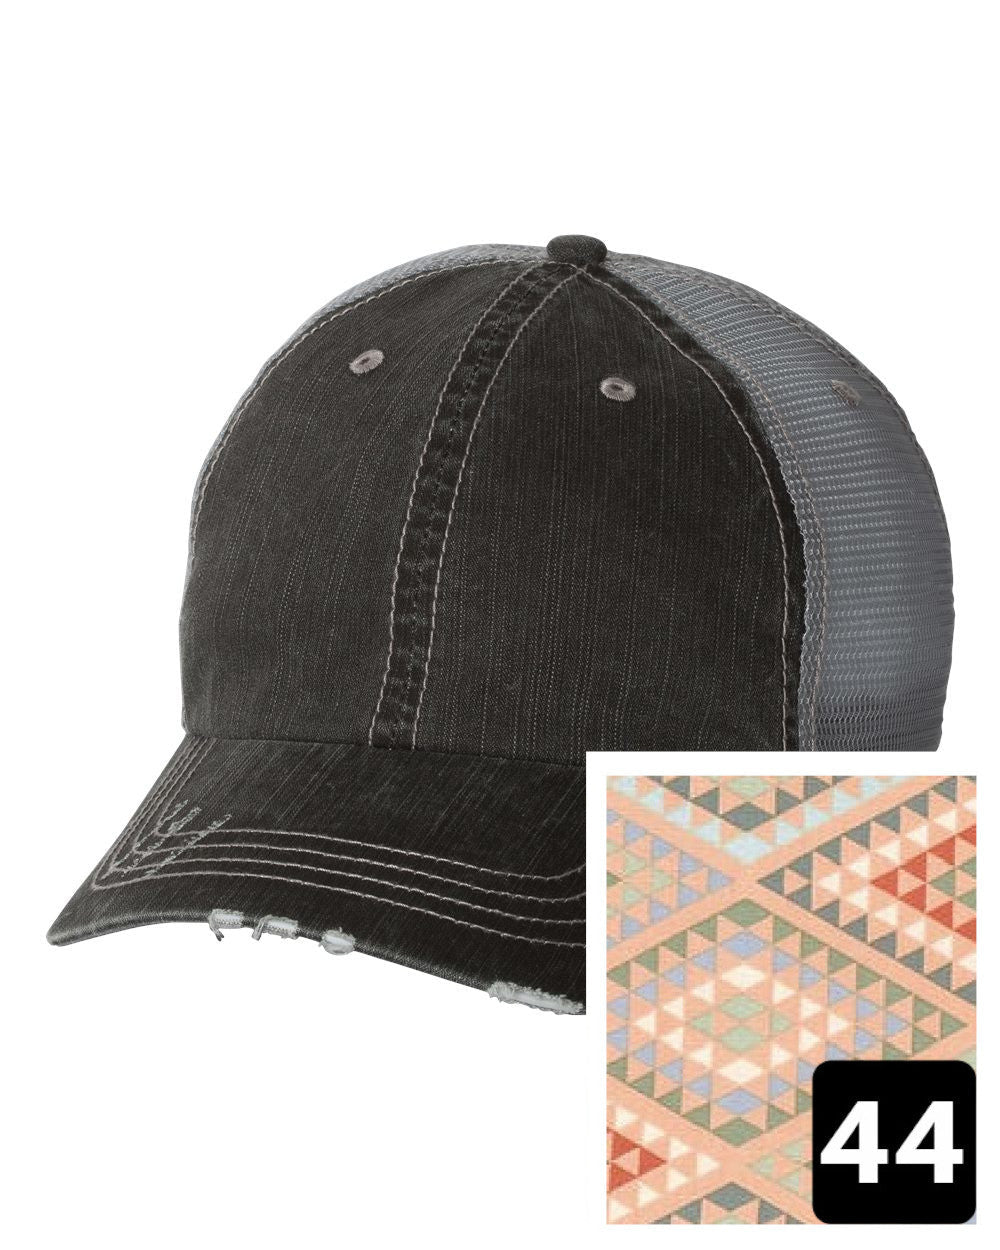 gray distressed trucker hat with navy coral and white chevron fabric state of Missouri